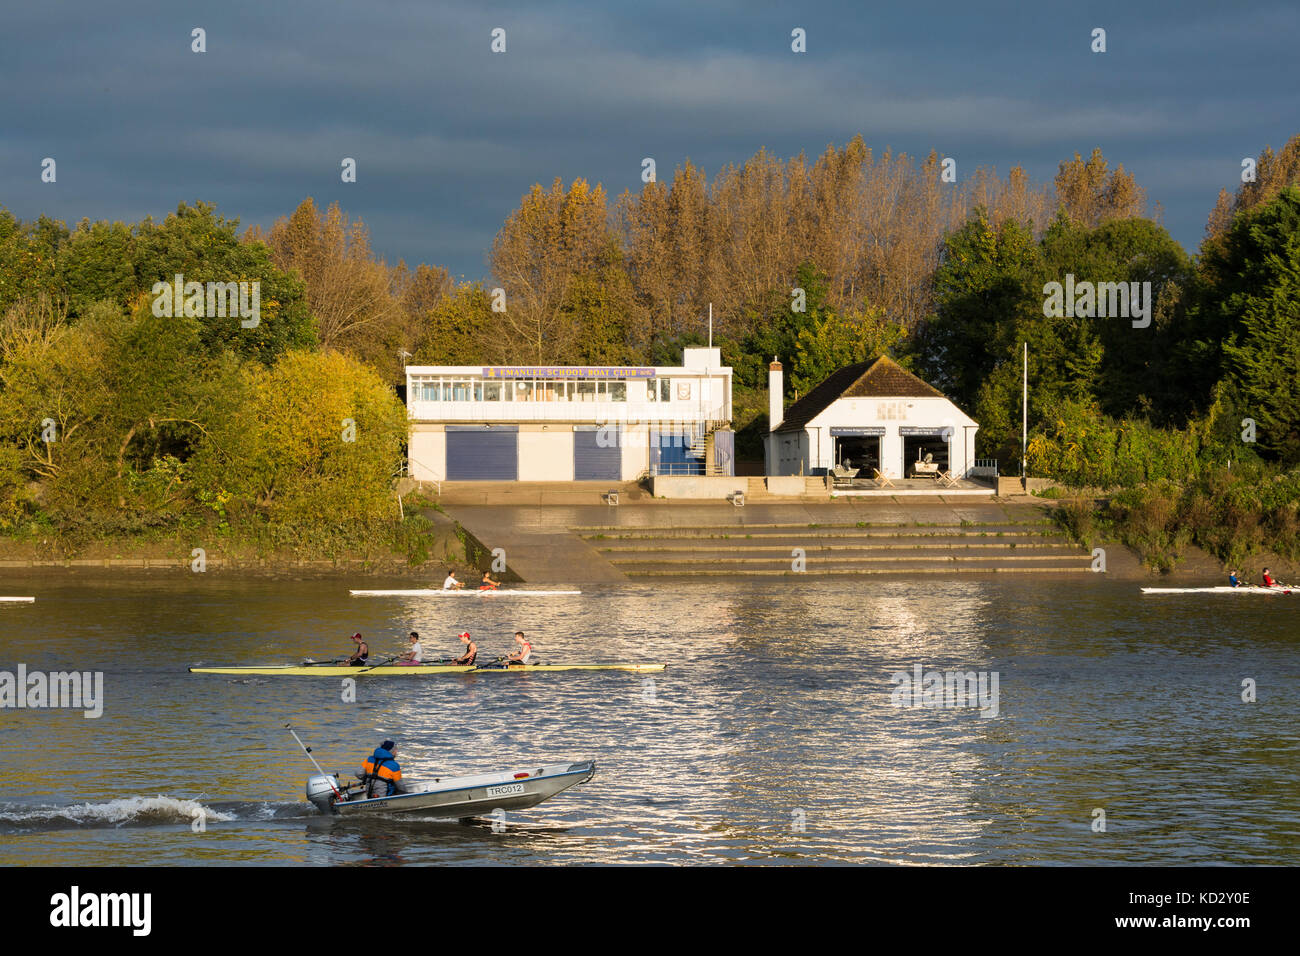 Emanuel School Boathouse and the Civil Service Boathouse, in Duke's Meadows, London, W4, England, UK. Stock Photo